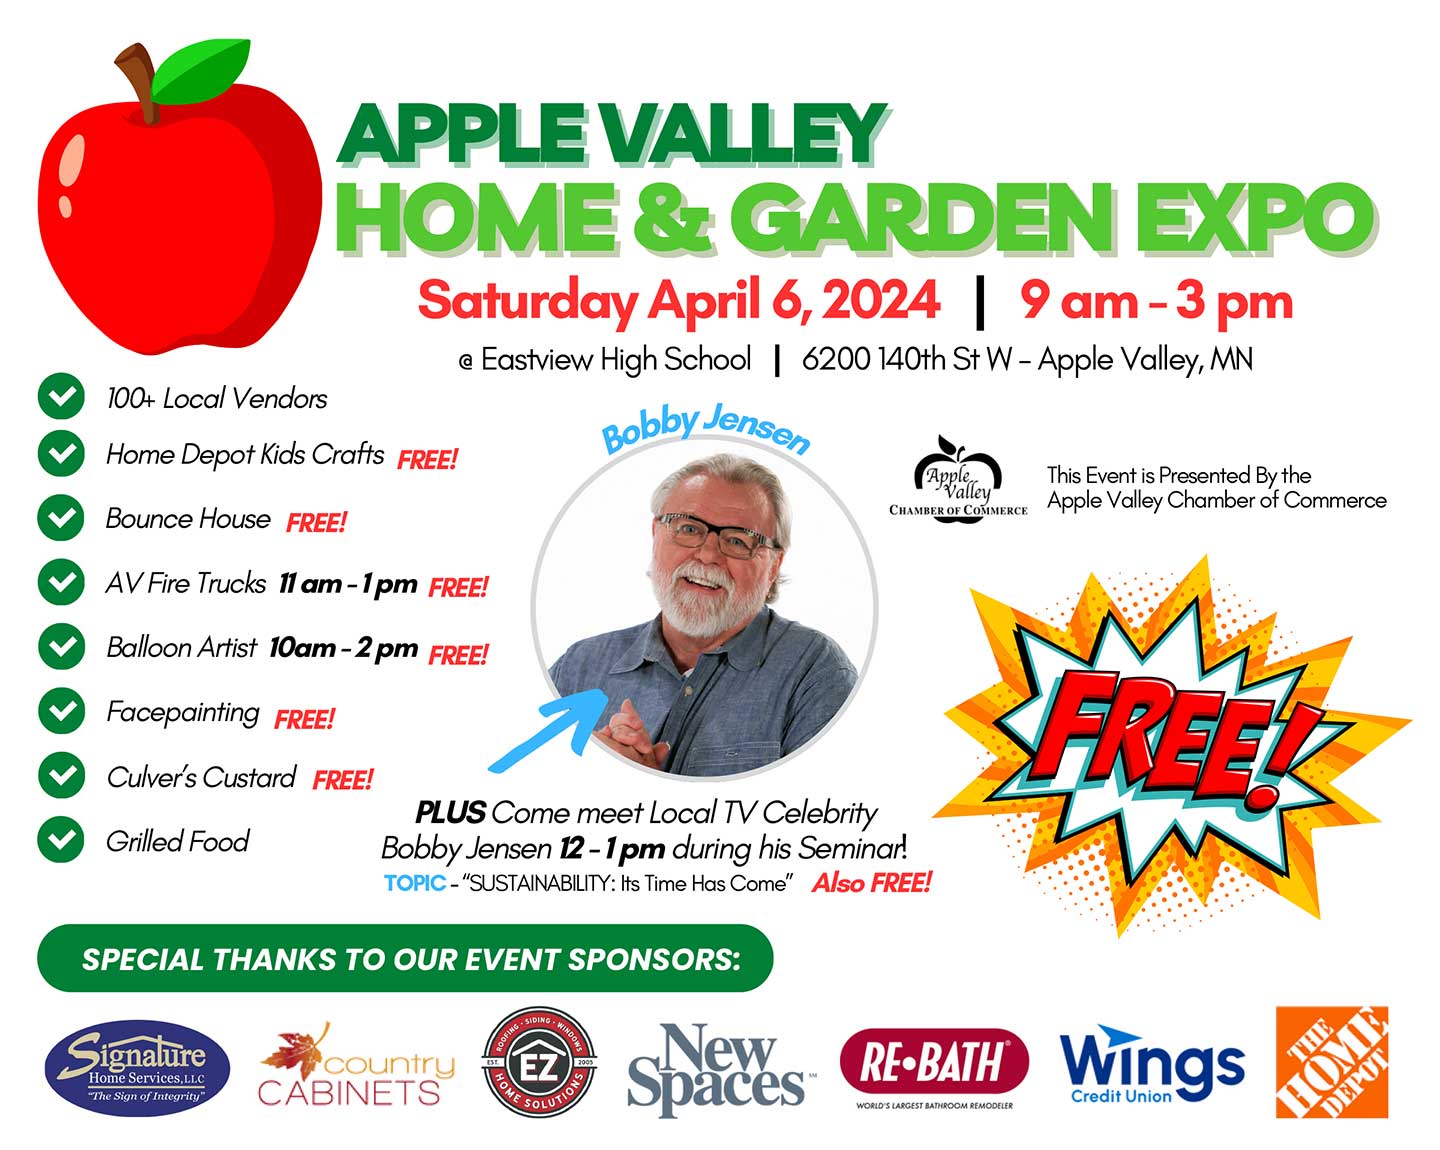 Apple Valley Home and Garden Expo - Saturday, April 6, 2024